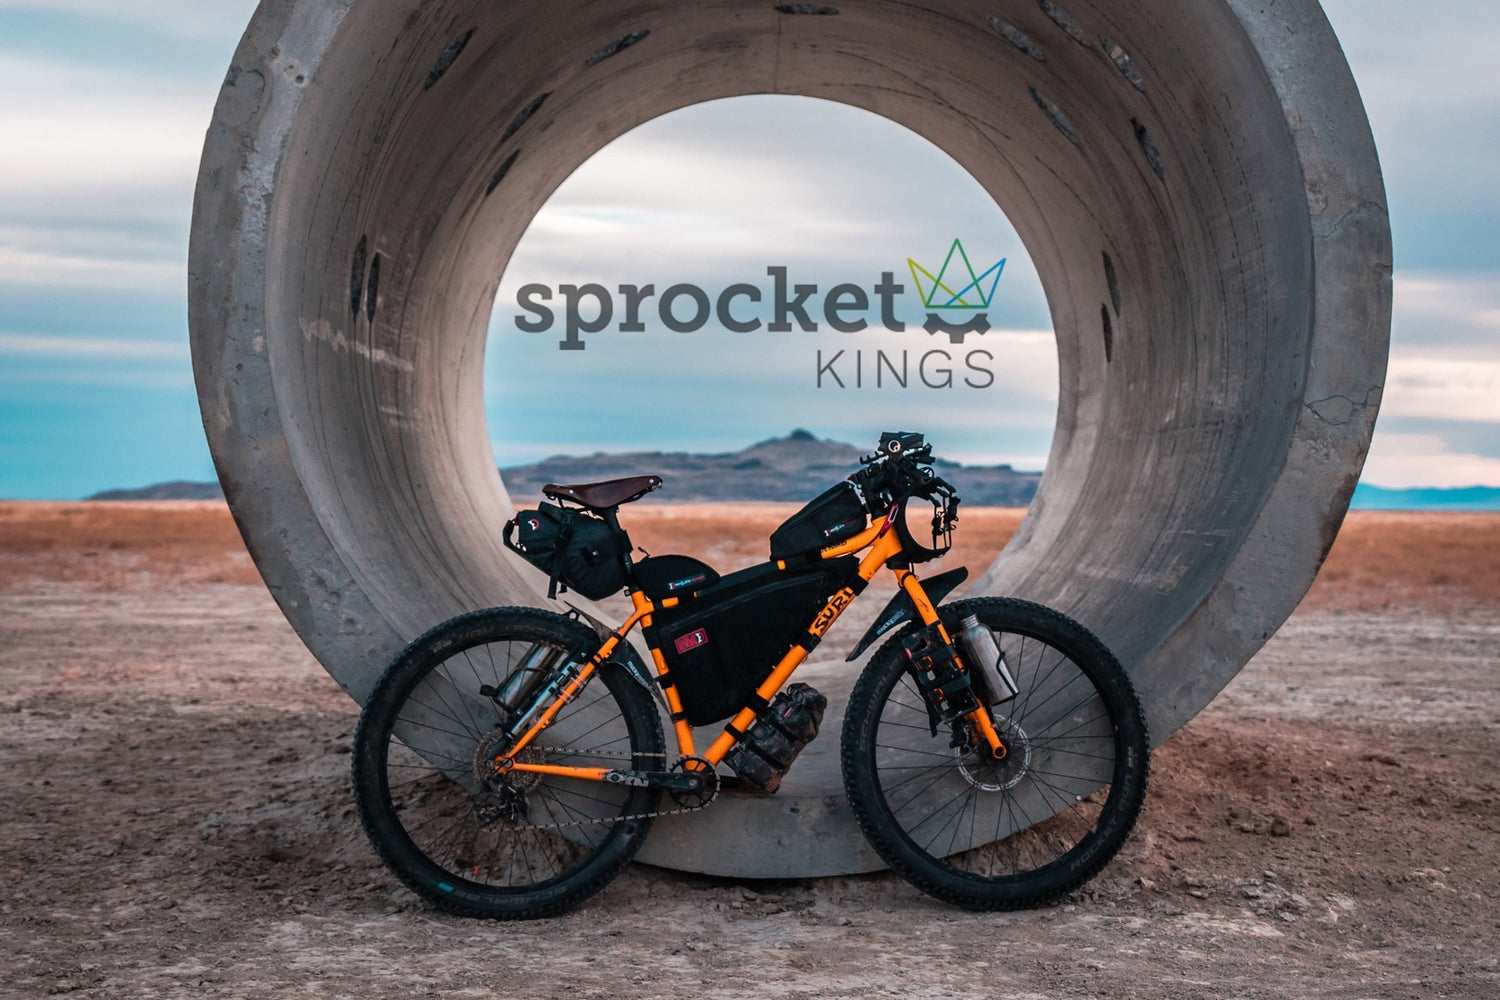 West Michigan Bike Shop Sprocket Kings offers a wide variety of parts and services.  Sprocket Kings Bicycle shop offers the best bike accessories and part prices around